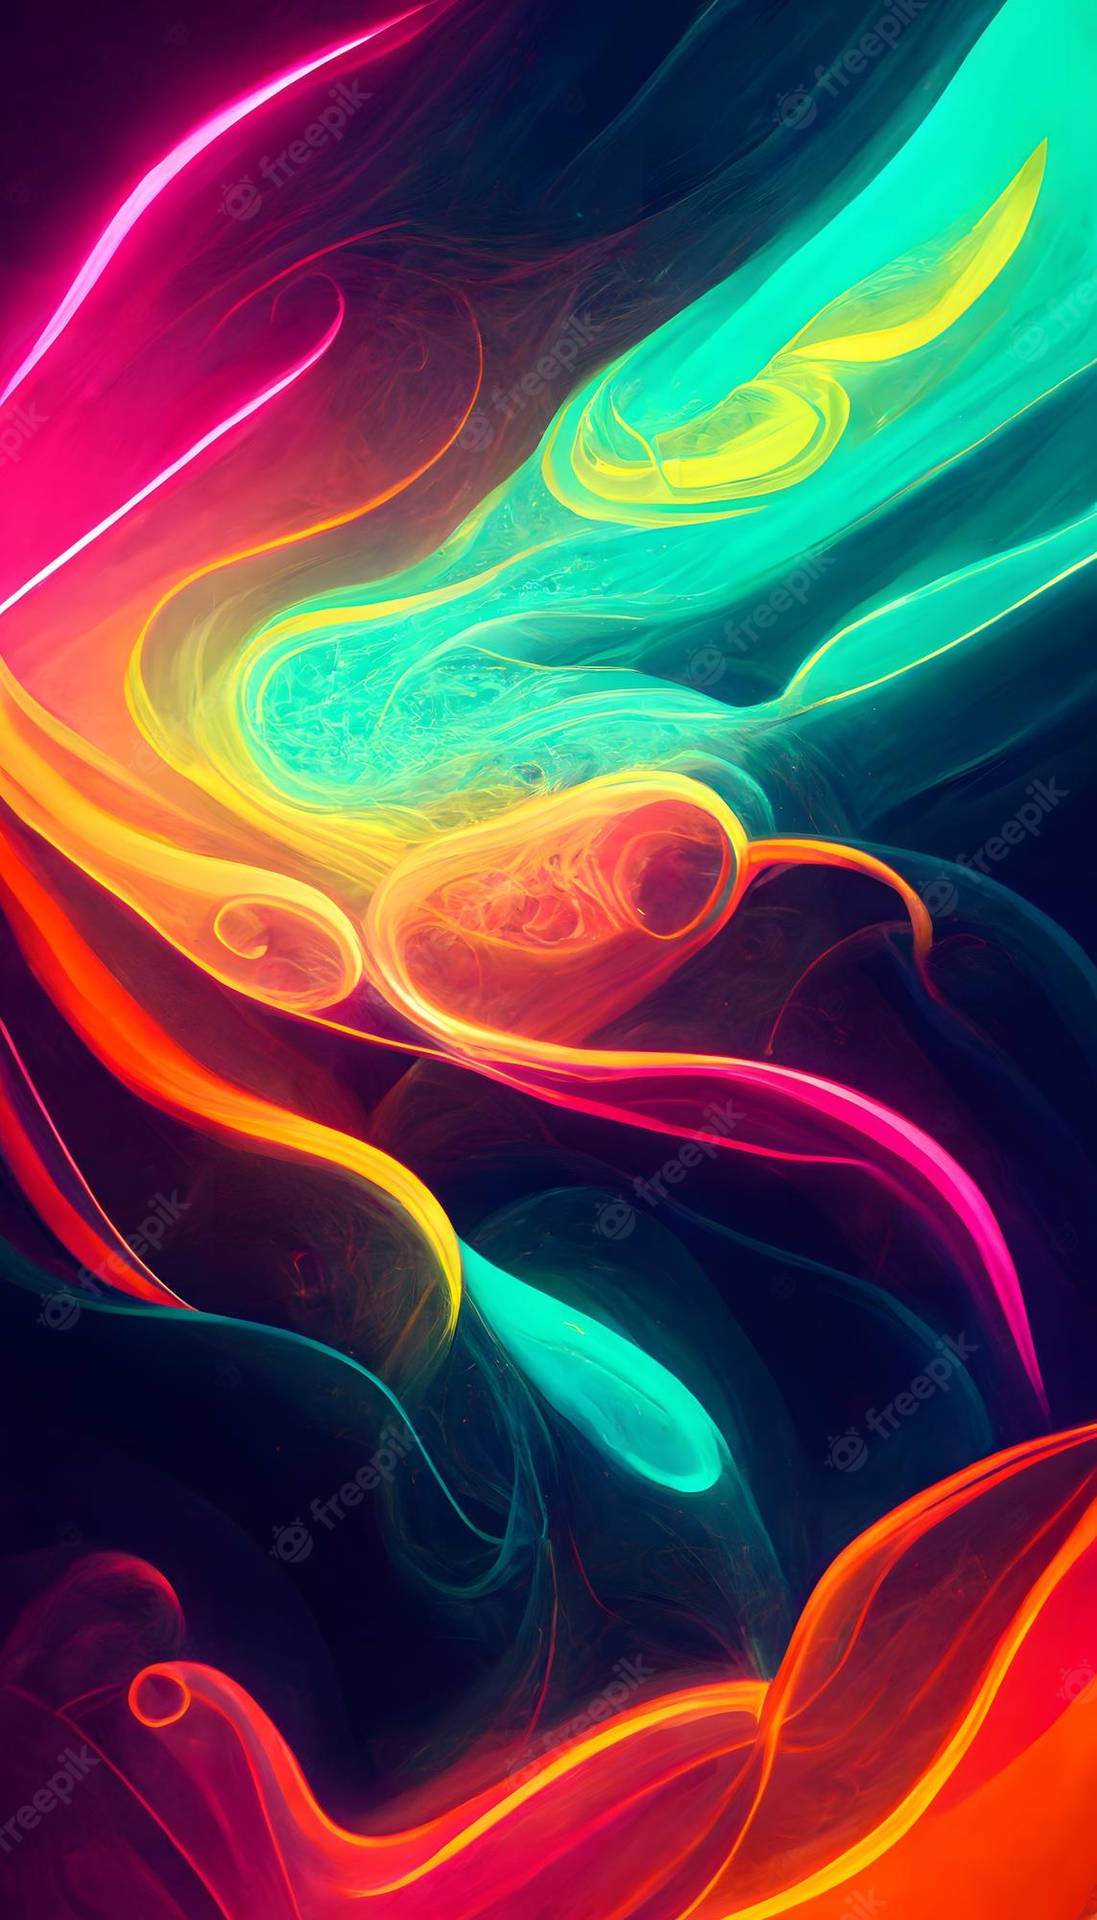 1082x1922px  free download  HD wallpaper abstract colorful amoled   Wallpaper Flare